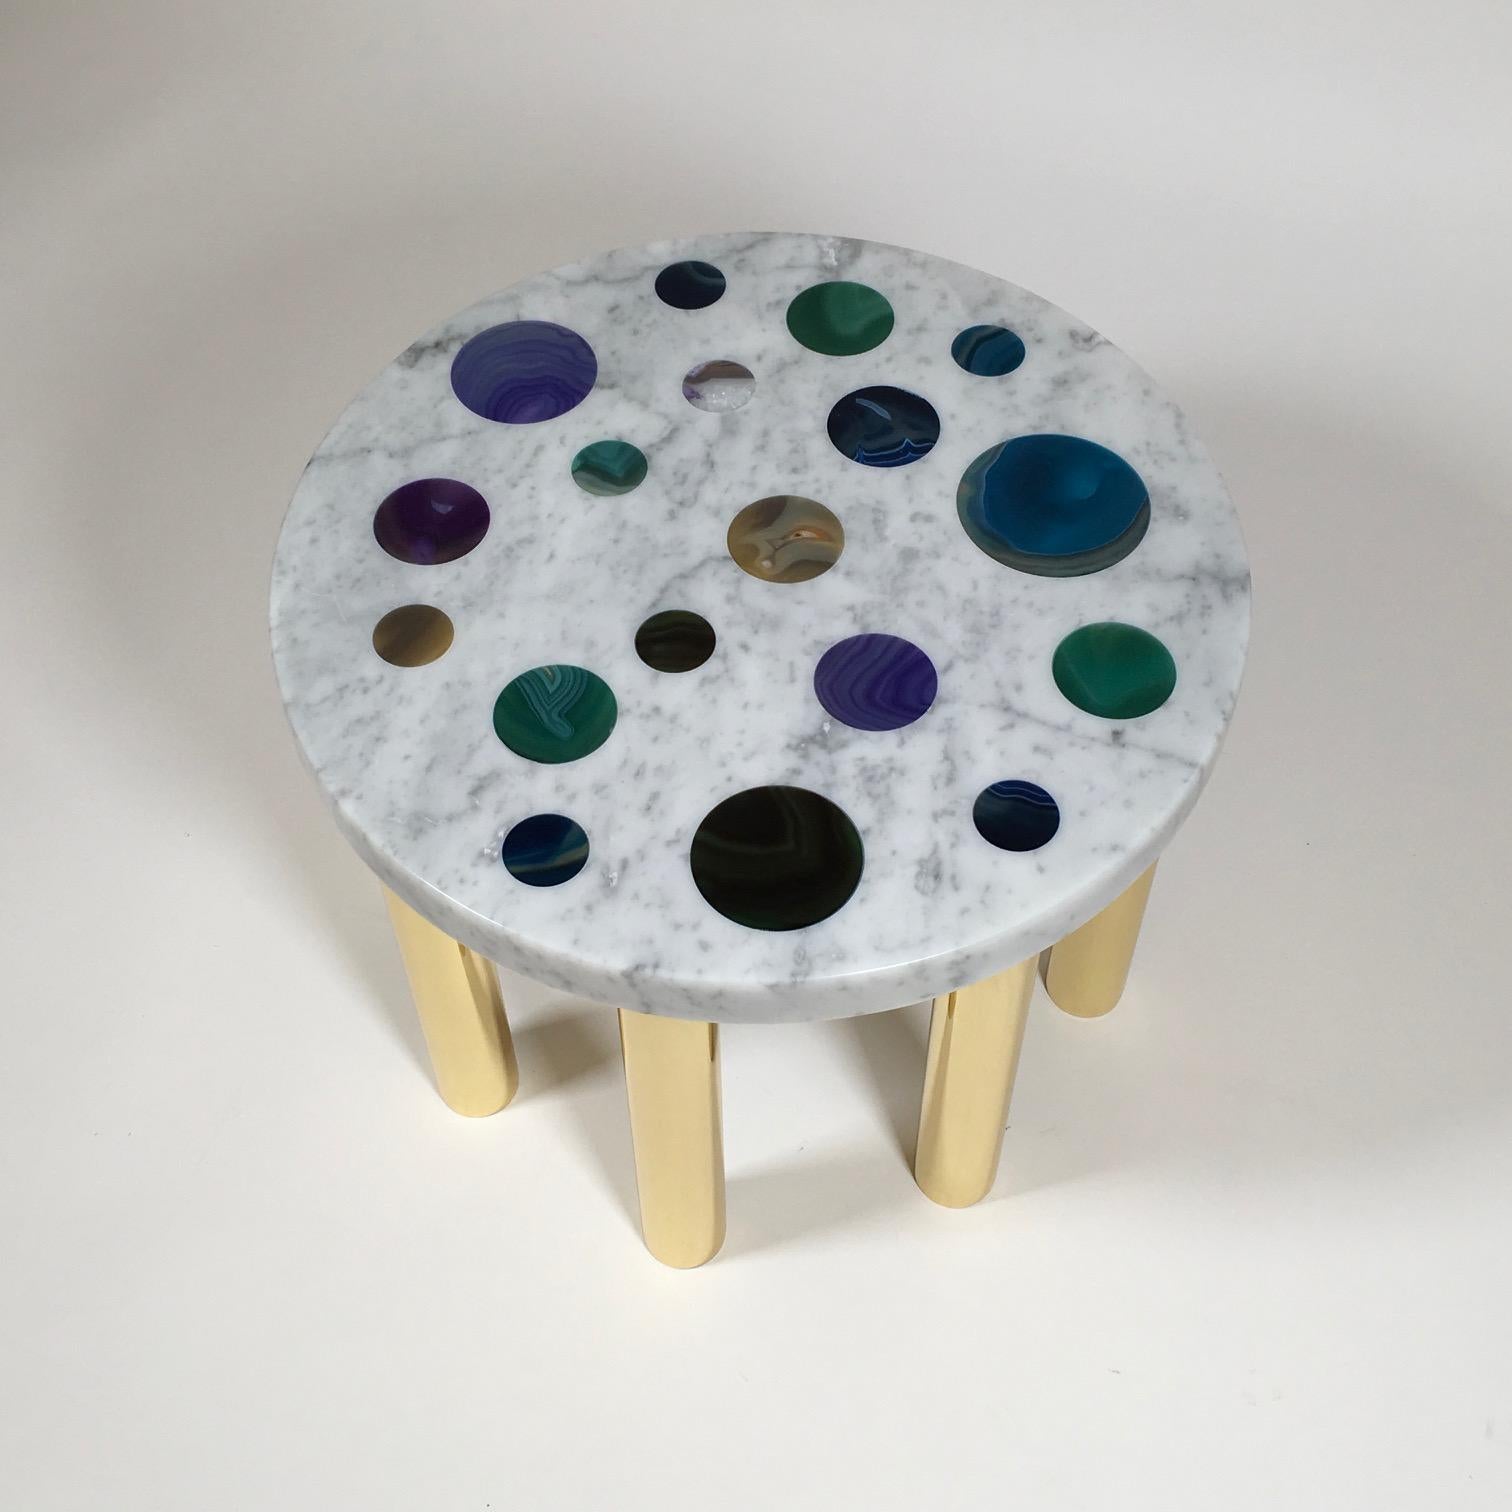 'Cosmos' coffee table in Carrara marble with agate disks of different colors and with 8 brass legs designed and produced by Studio Superego in 2018.

Superego Editions was born in 2006, performing a constant activity of research in decorative arts